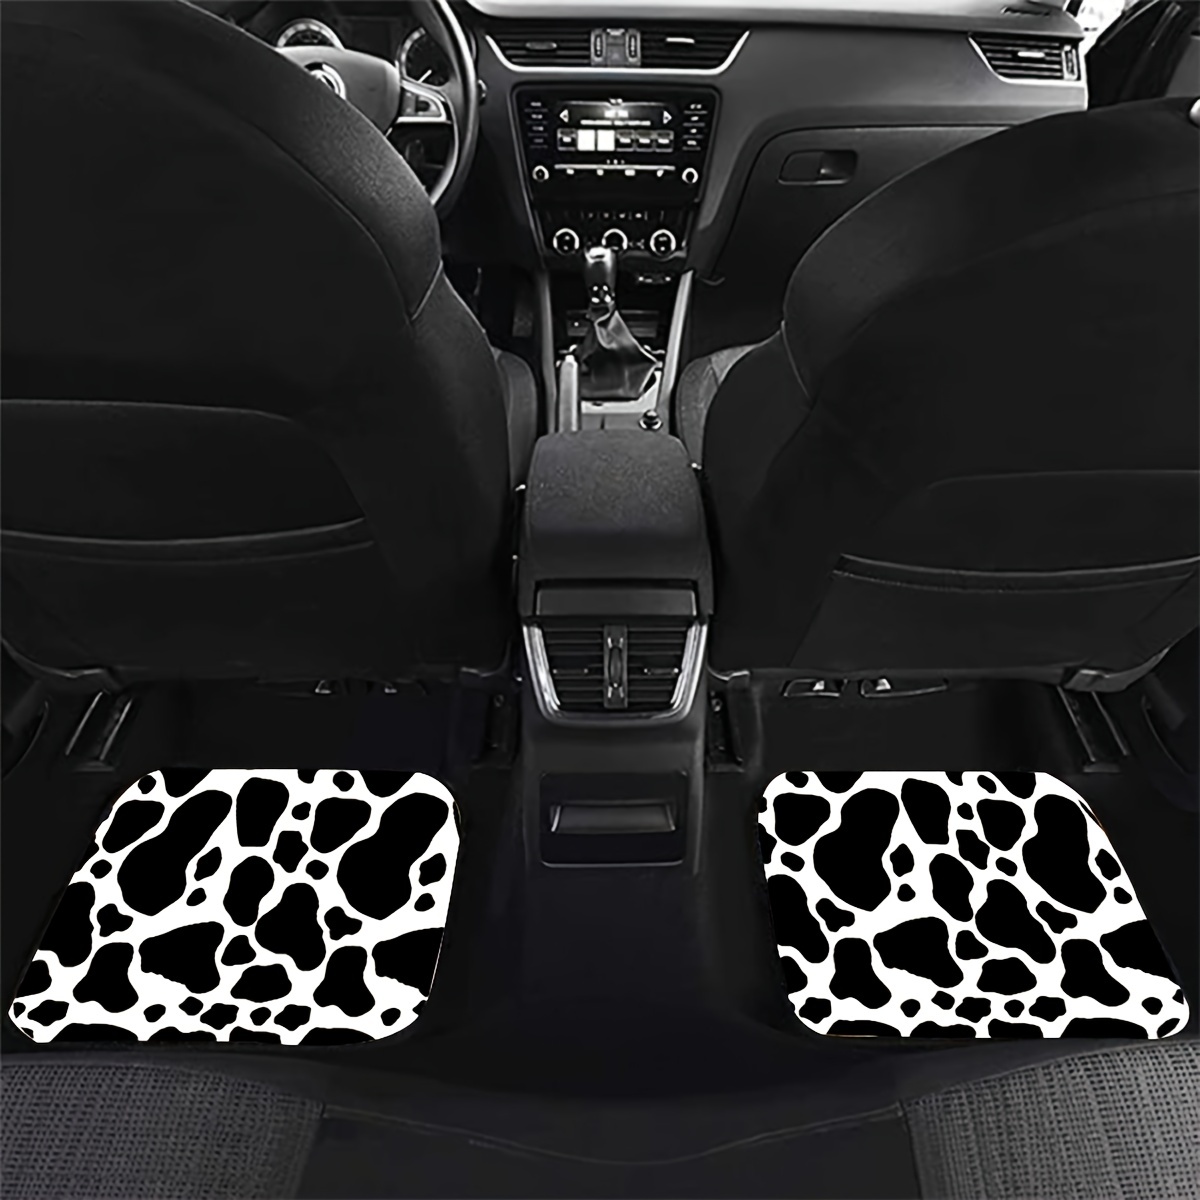  2PCS Bling Cow Print Car Accessories for Women